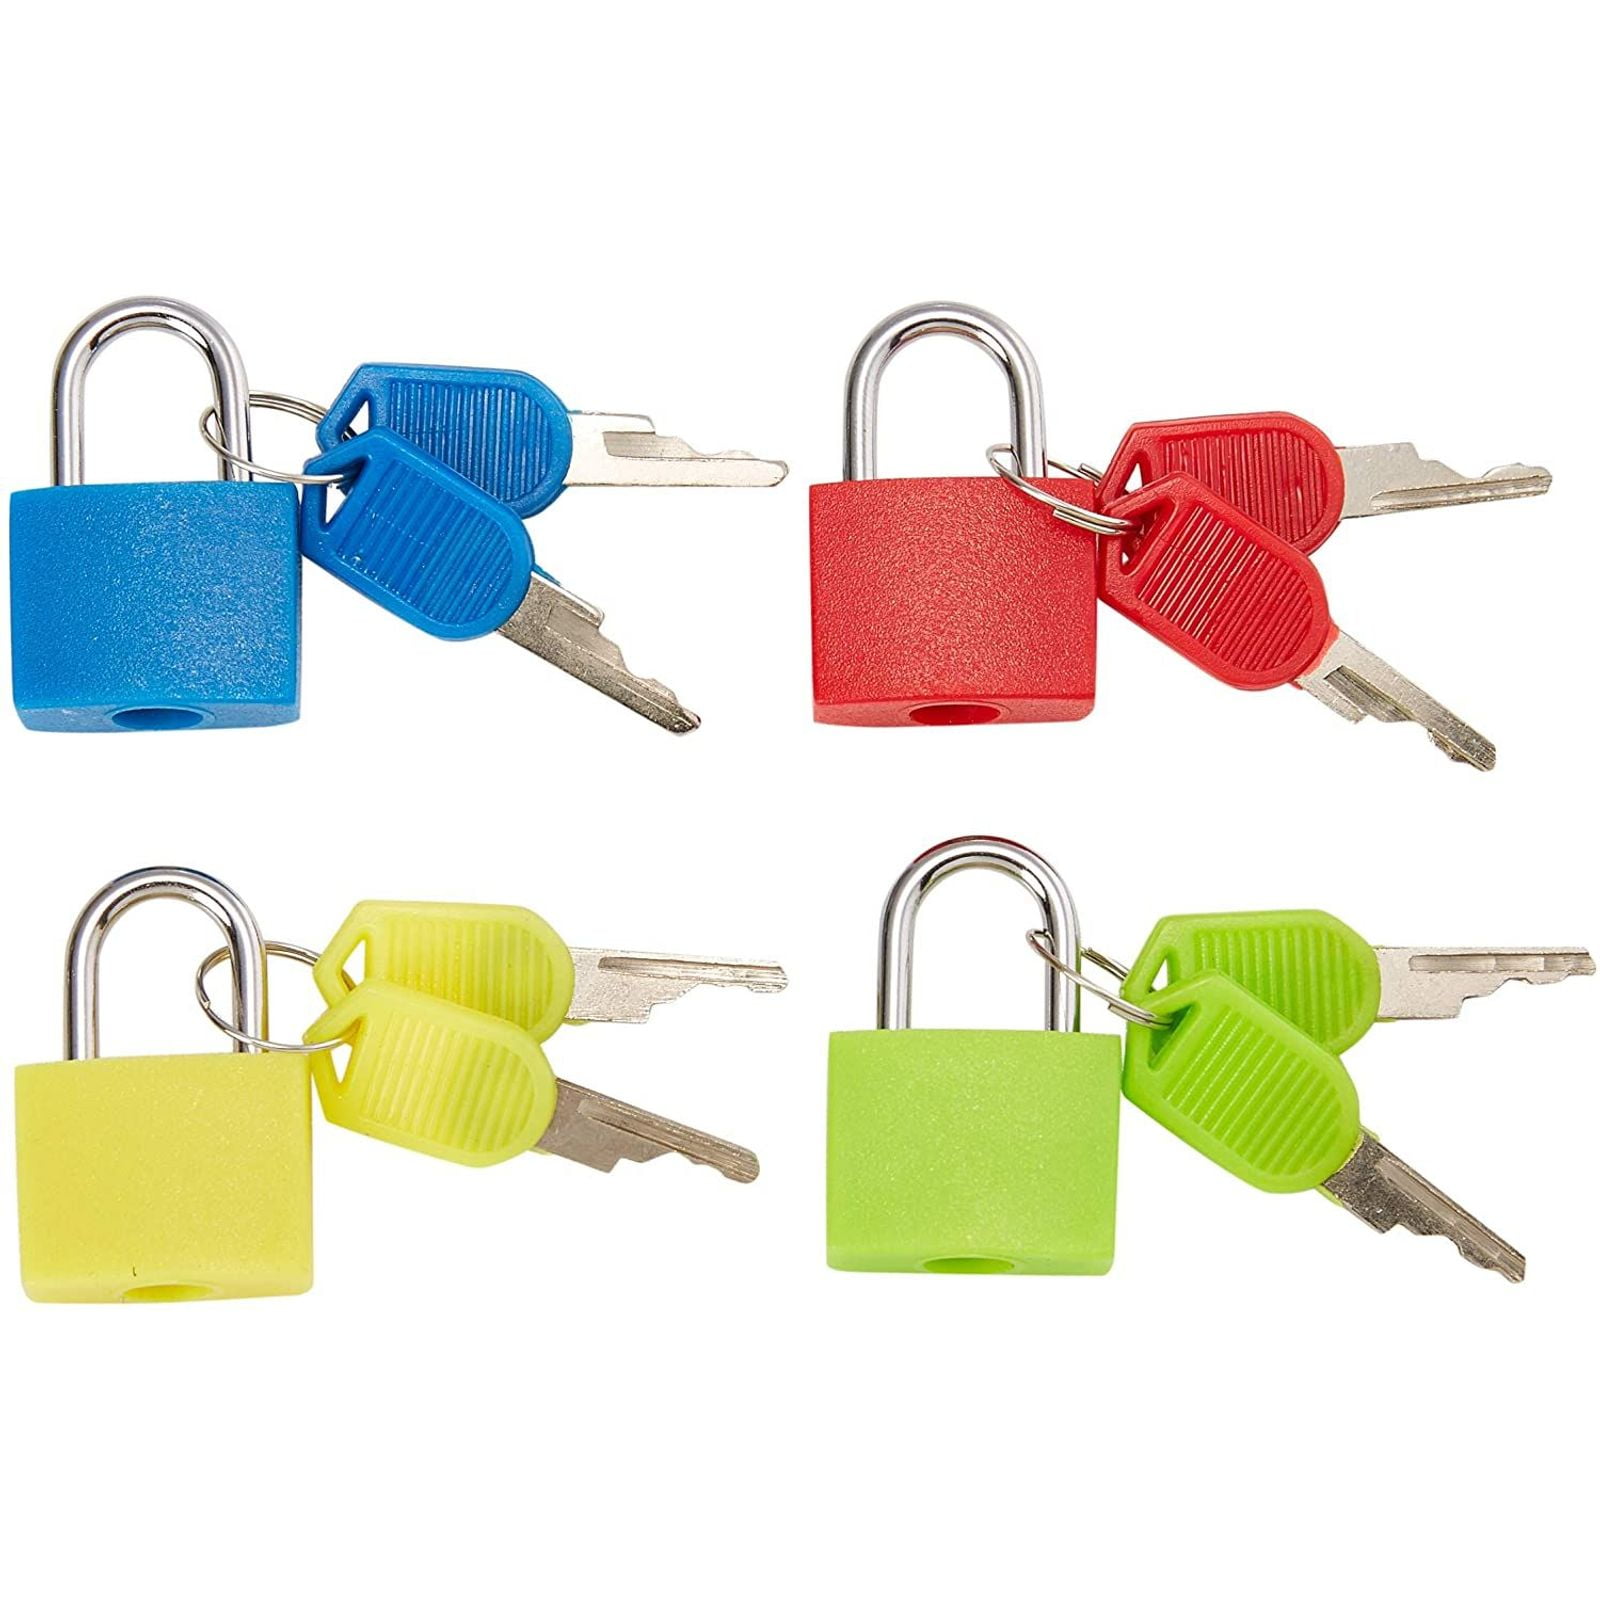 Nrevichng 6Pcs Small Locks with Keys, Multicolor Luggage Locks ABS Plastic  Covered Copper Keyed Padlock Lock for Locker with Key - Suitab